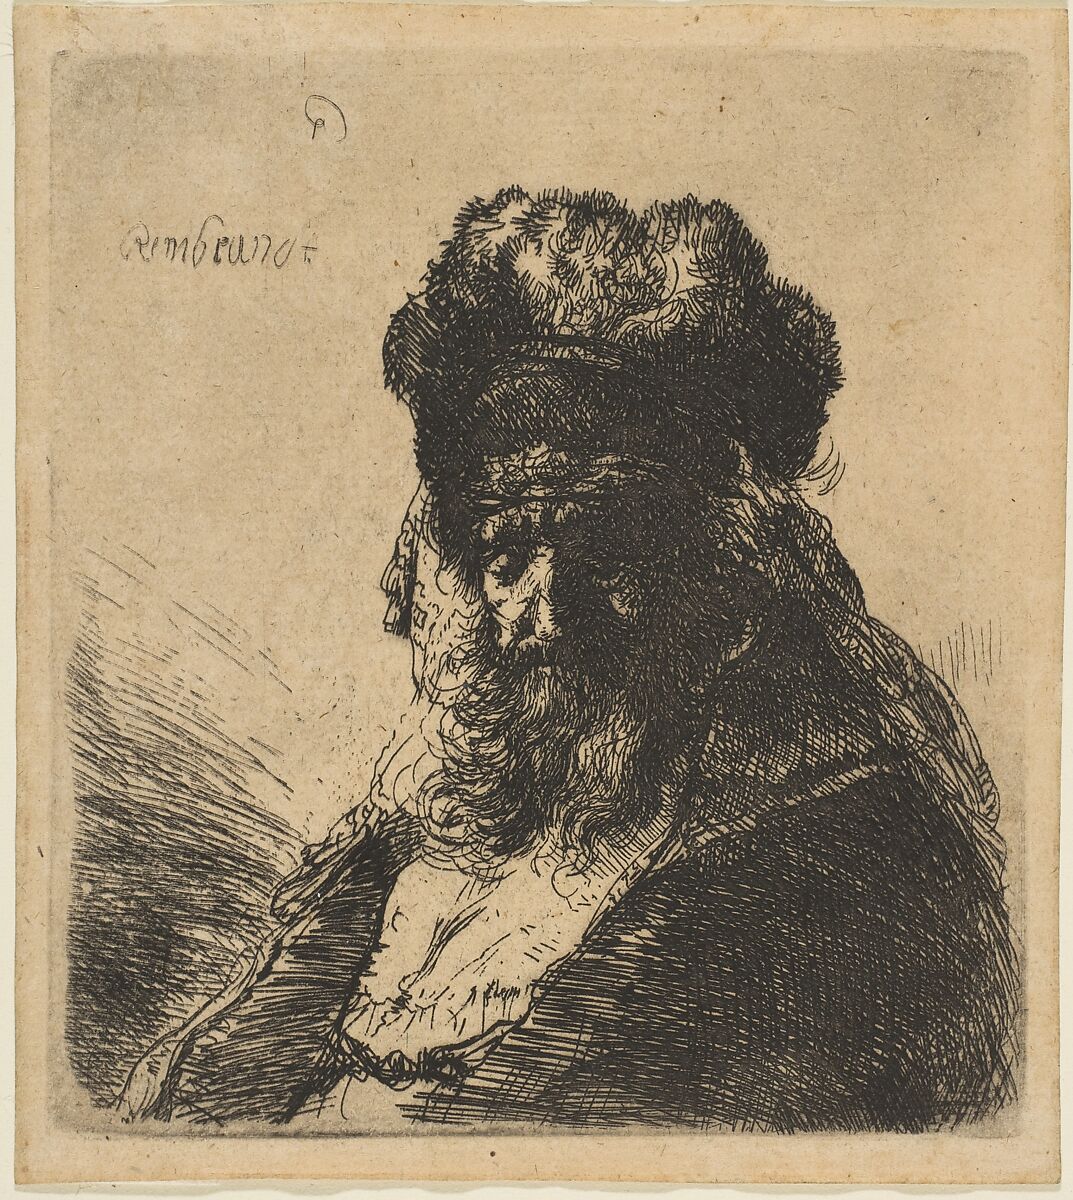 The Old Bearded Man in a High Fur Cap, with Eyes Closed, Rembrandt (Rembrandt van Rijn) (Dutch, Leiden 1606–1669 Amsterdam), Etching 